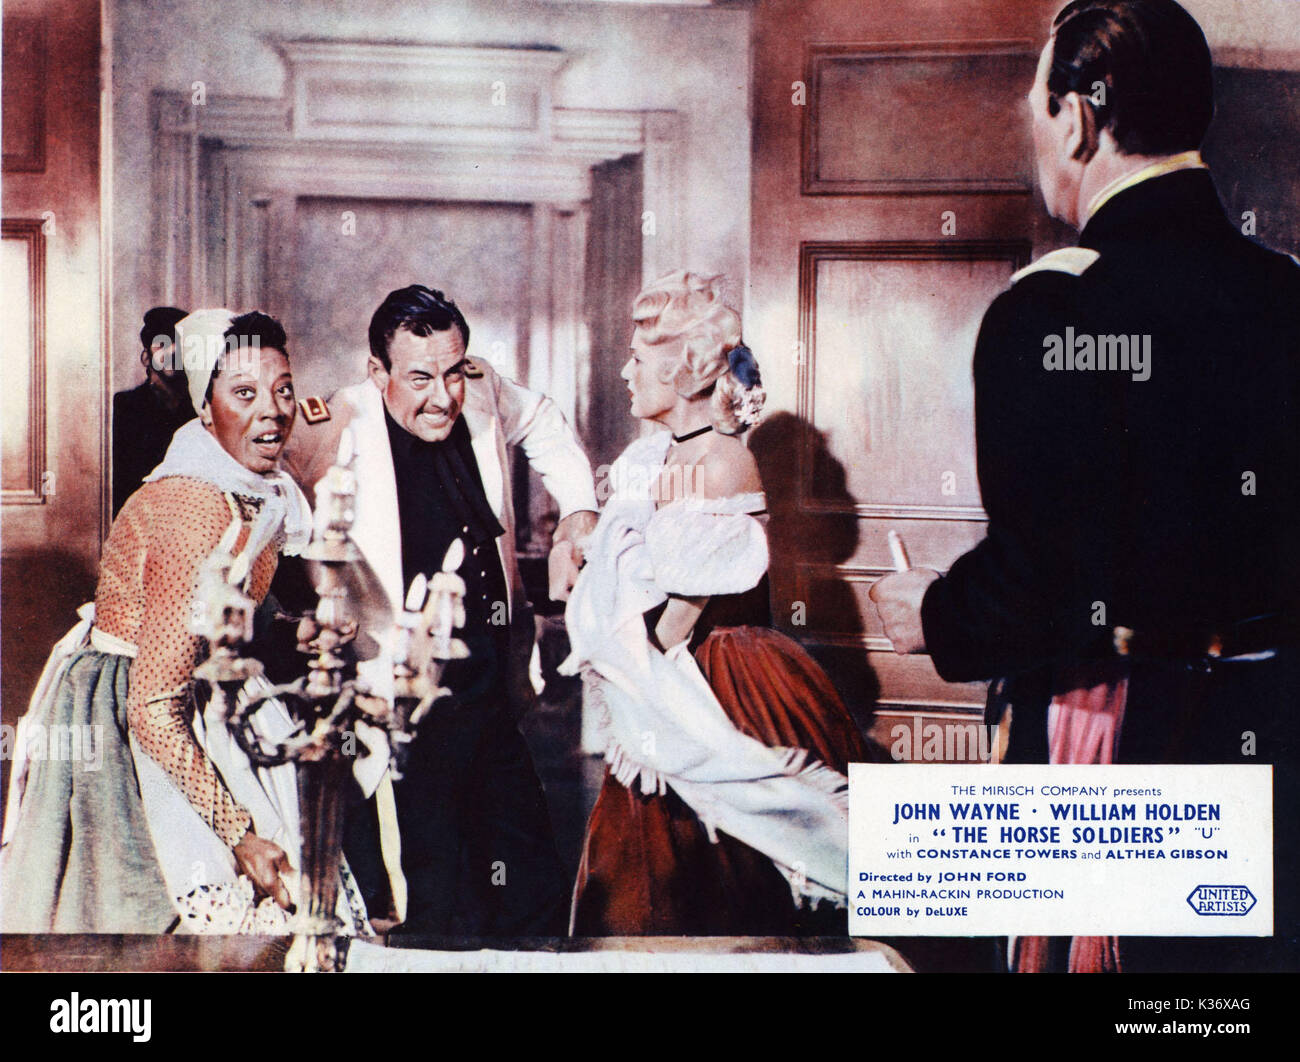 THE HORSE SOLDIERS ALTHEA GIBSON, WILLIAM HOLDEN, CONSTANCE TOWERS AND JOHN WAYNE A UNITED ARTISTS FILM     Date: 1959 Stock Photo